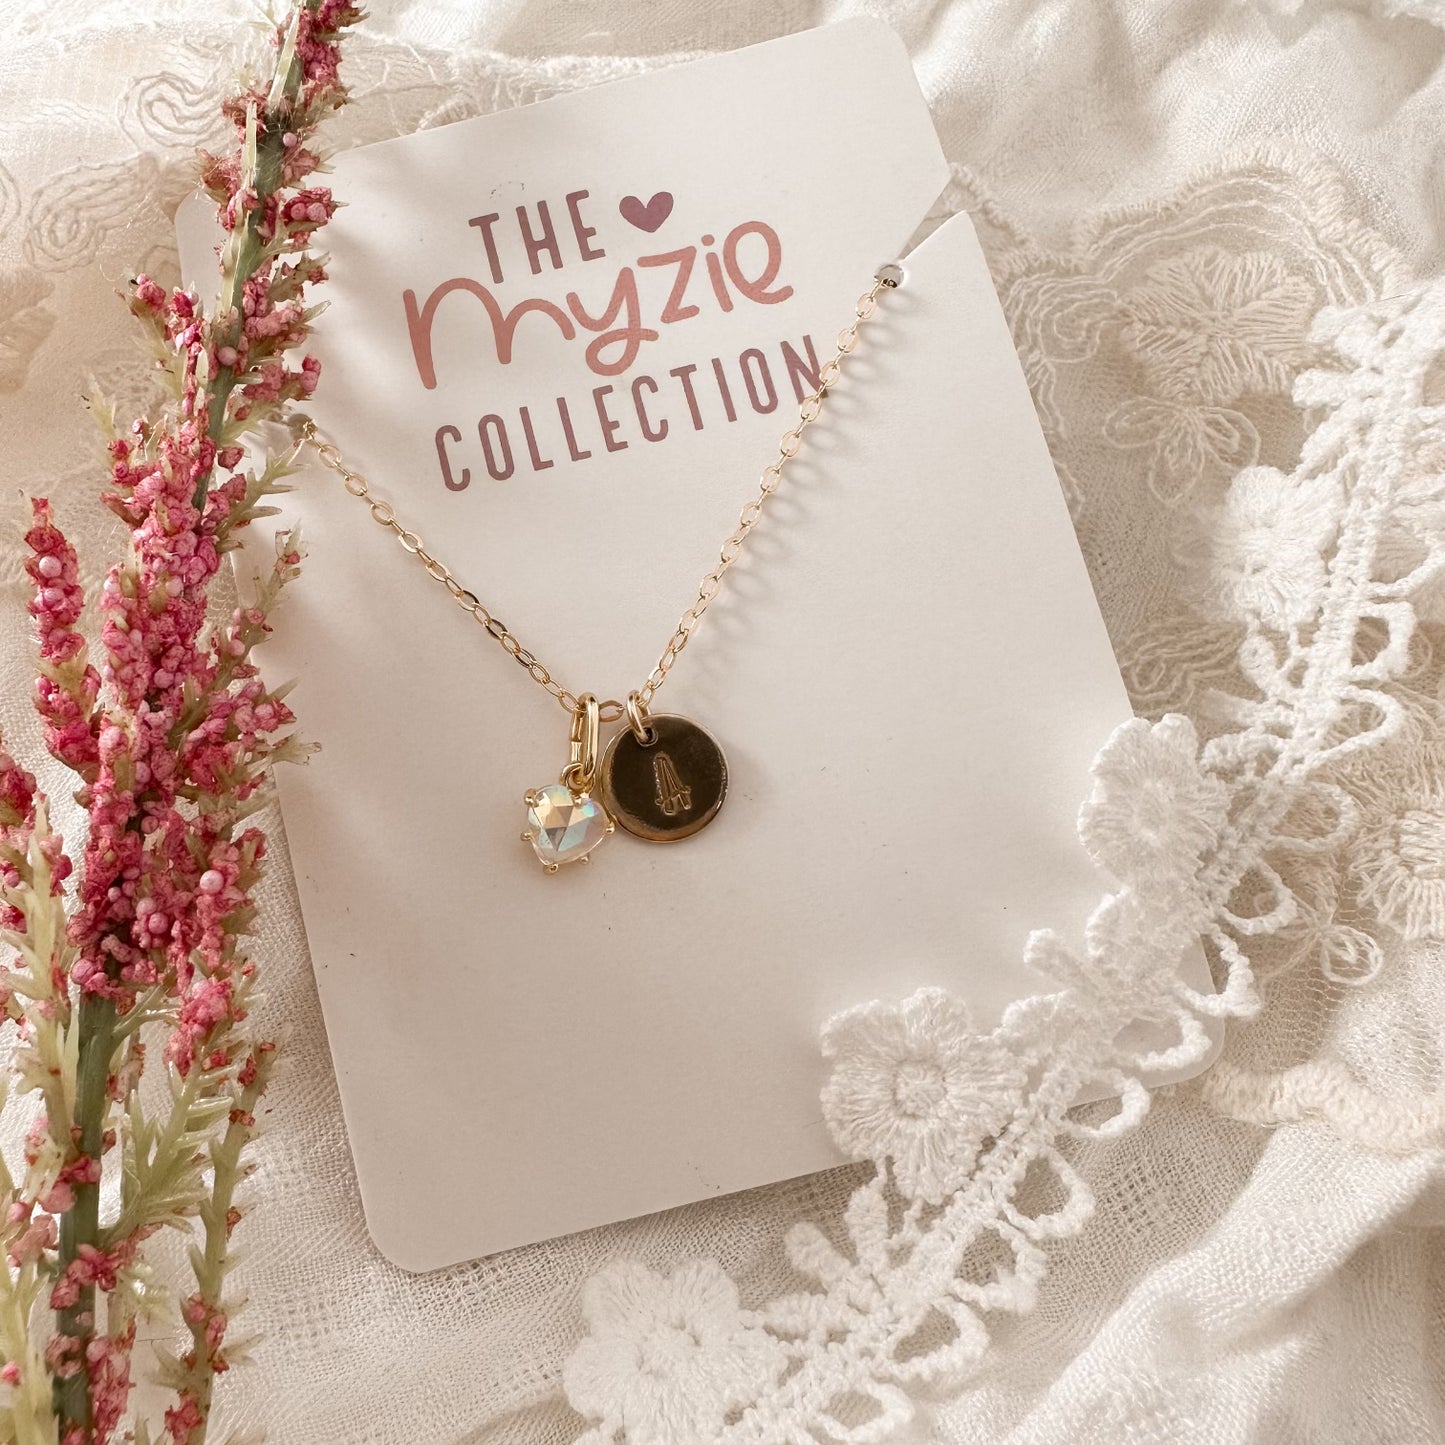 Monogram opal crystal heart necklace - Myzie collection